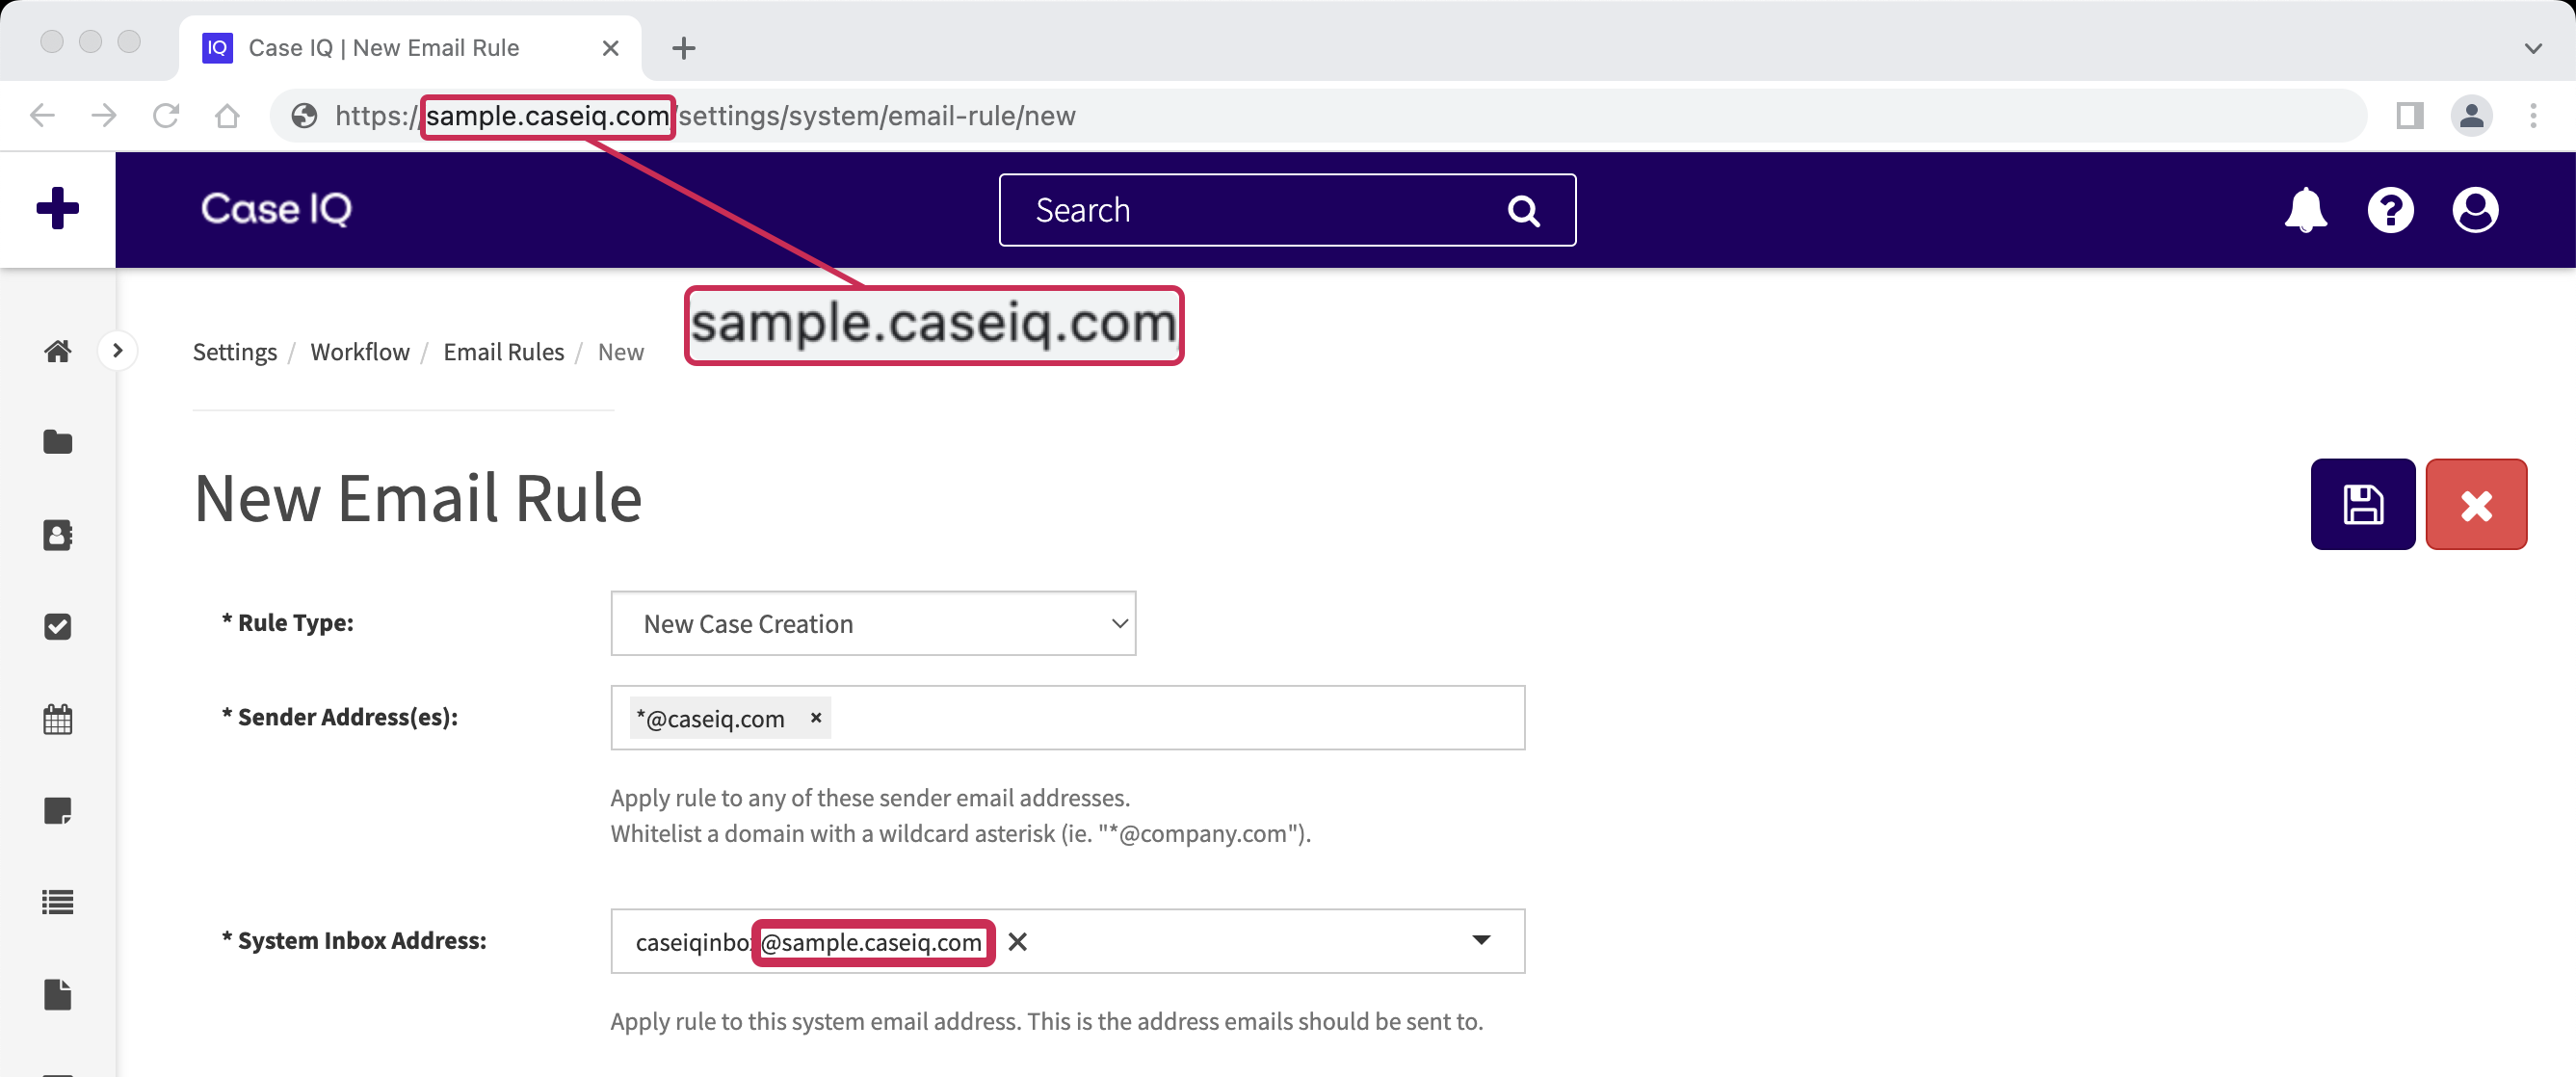 The following text is highlighted in the URL bar and System Inbox Address field: "sample.Case IQ.com".